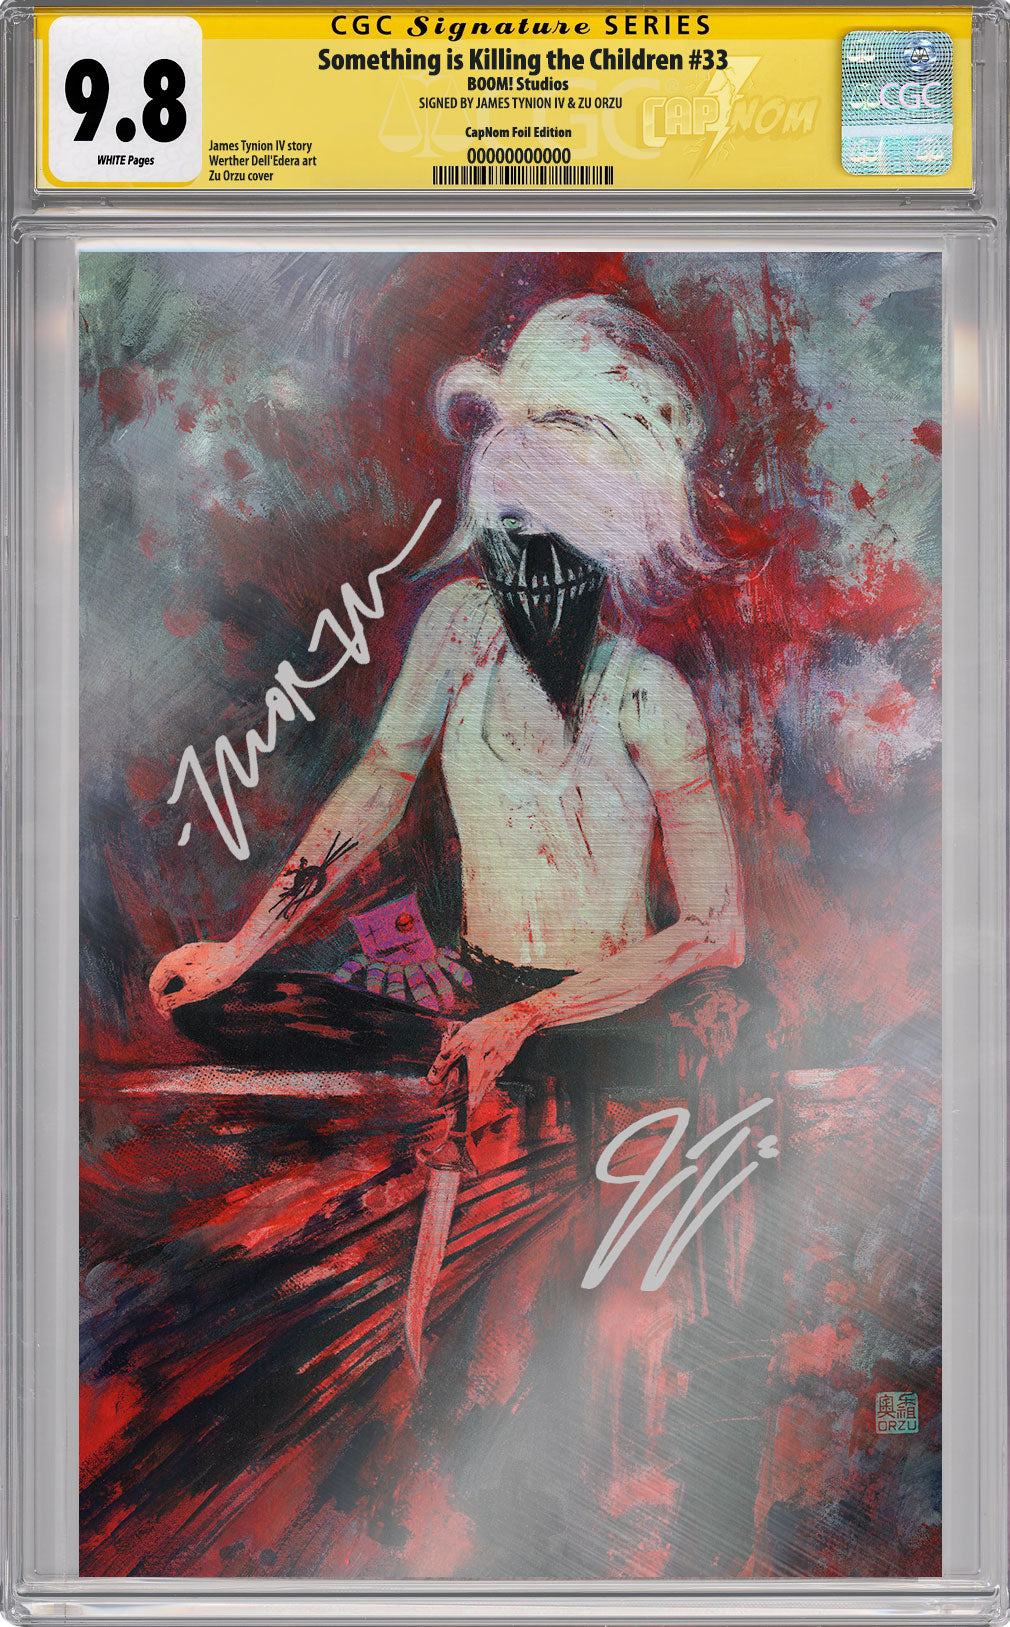 SOMETHING IS KILLING THE CHILDREN #33 FOIL COVER BY ZU ORZU CGC SIG SERIES DOUBLED SIGNED BY ZU & TYNION